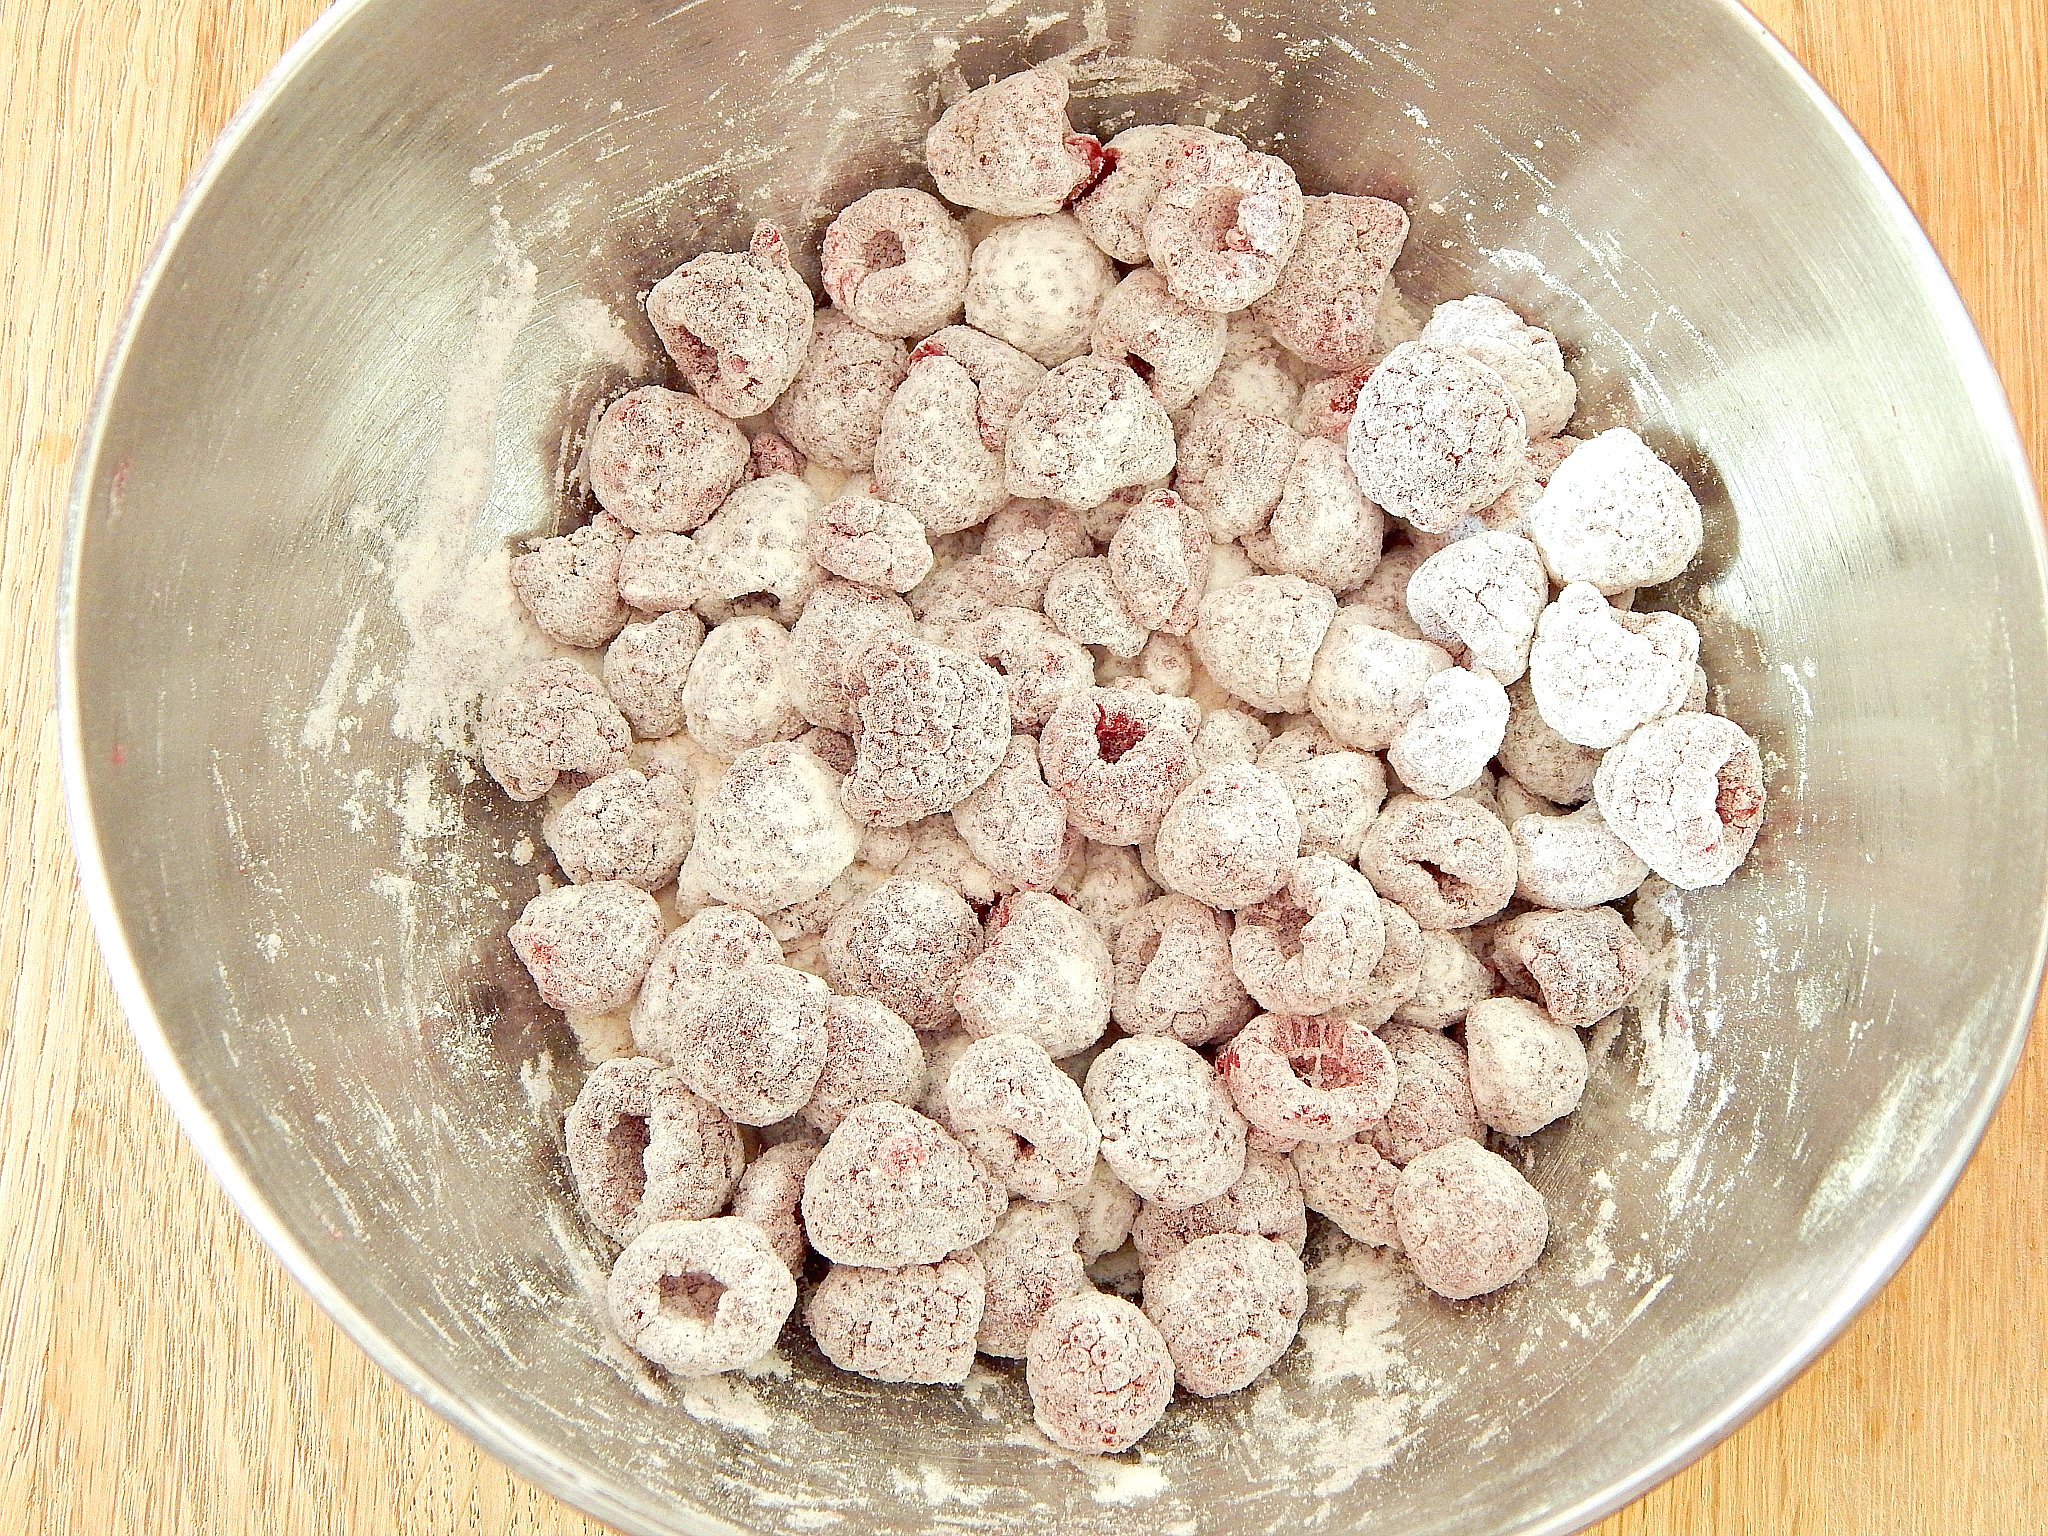 flour dusted raspberries ready to be mixed into batter for raspberry breakfast muffins